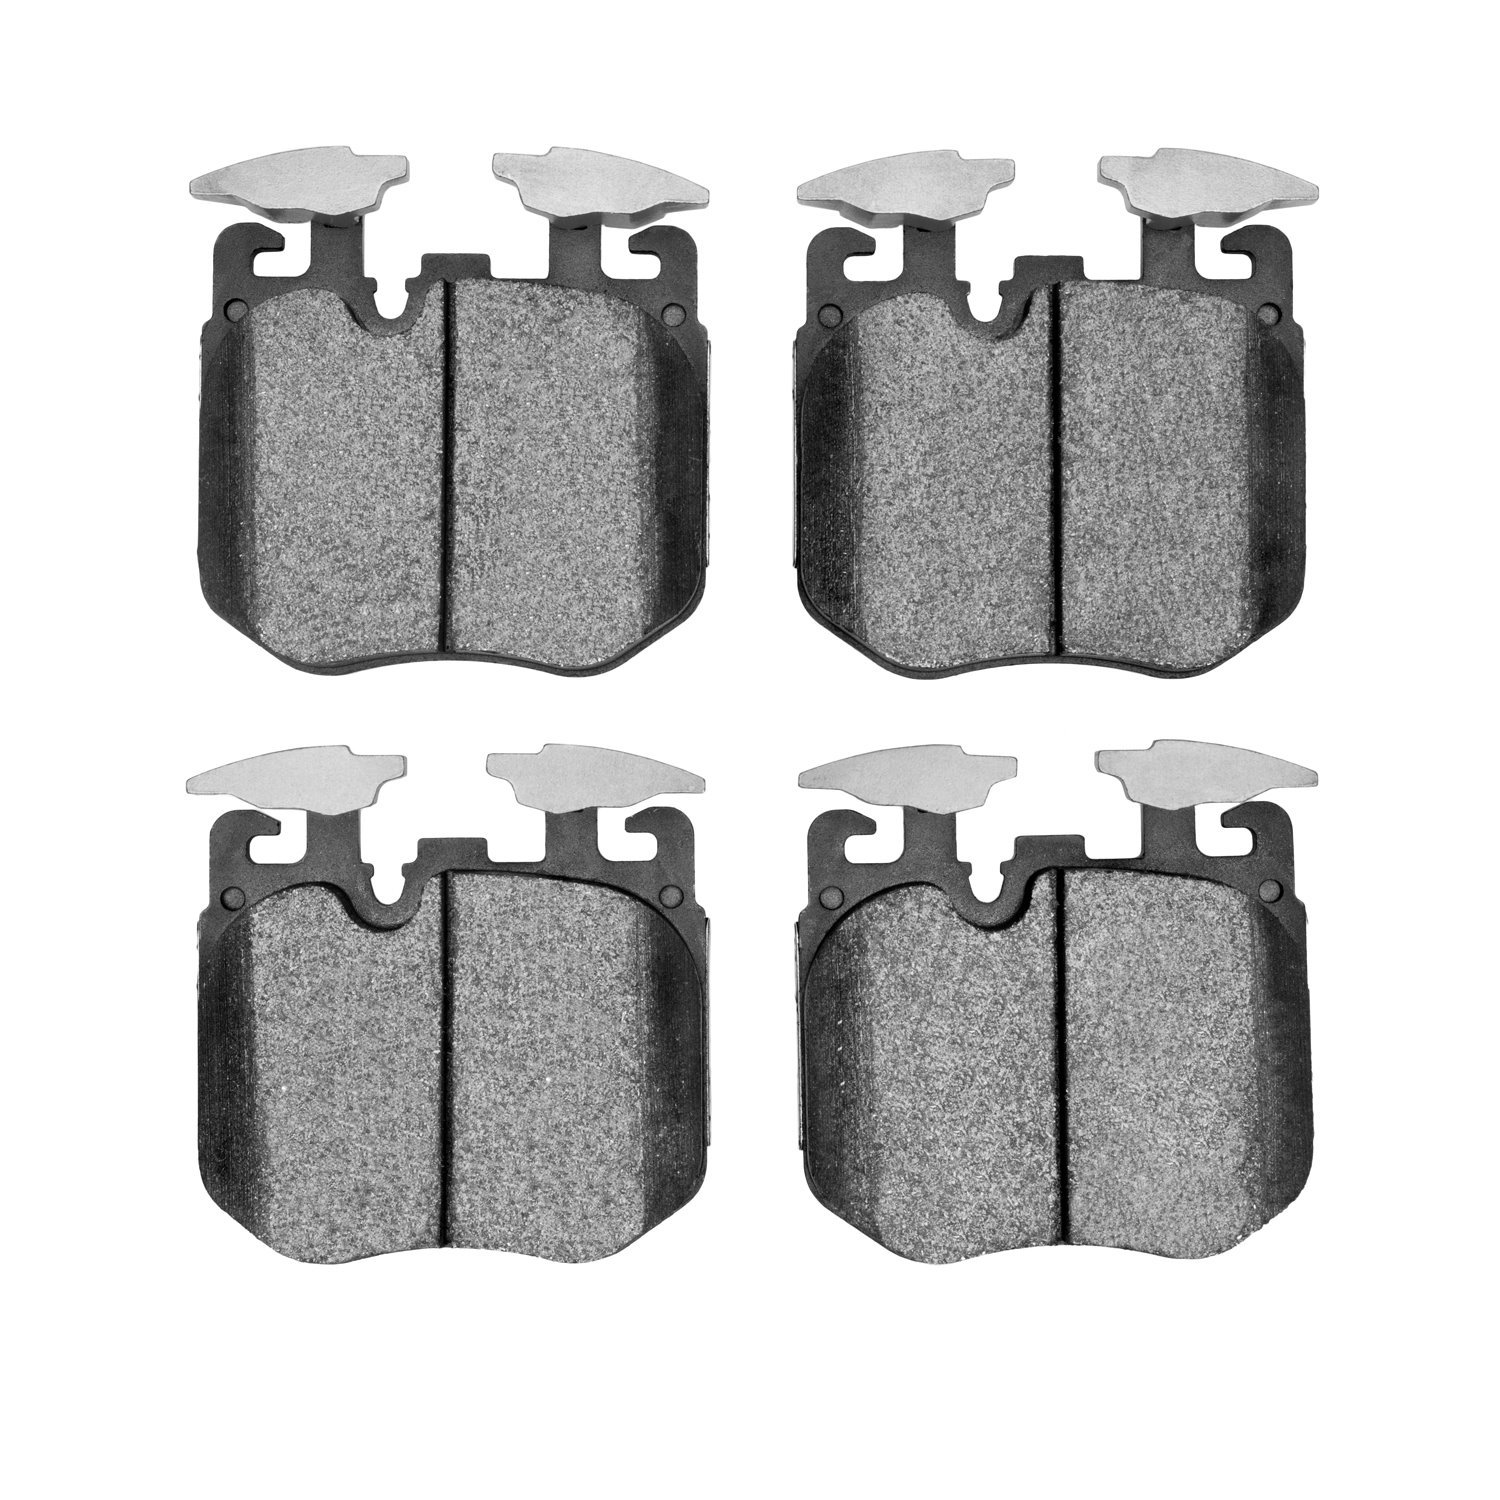 1552-1868-00 5000 Advanced Low-Metallic Brake Pads, Fits Select Multiple Makes/Models, Position: Front